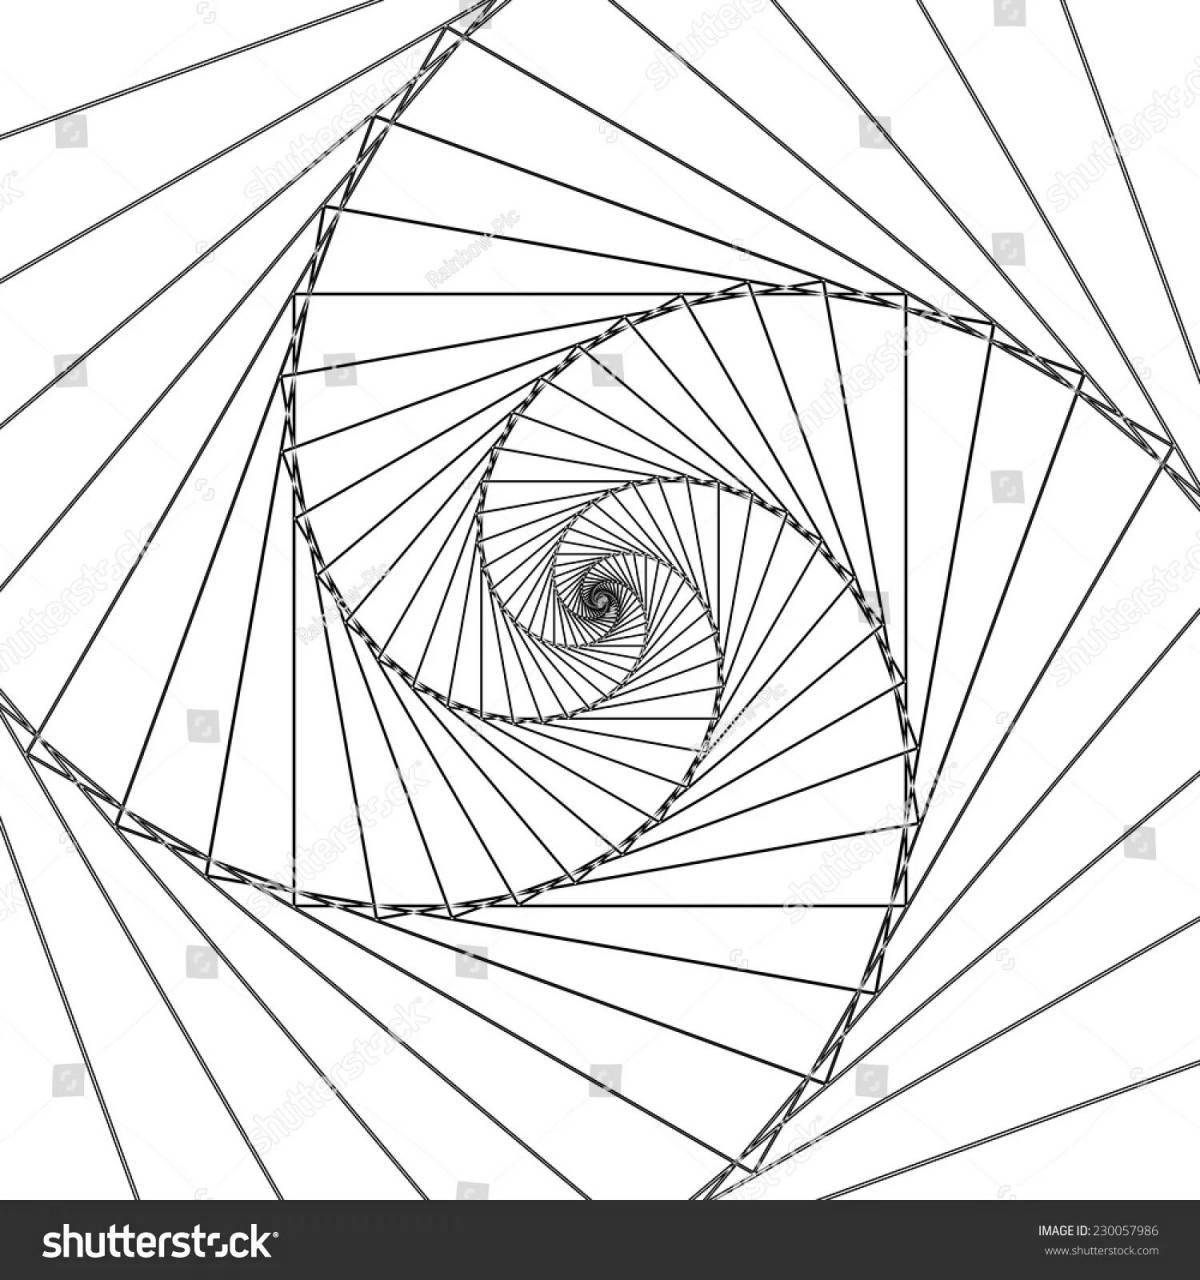 Delicate spiral coloring